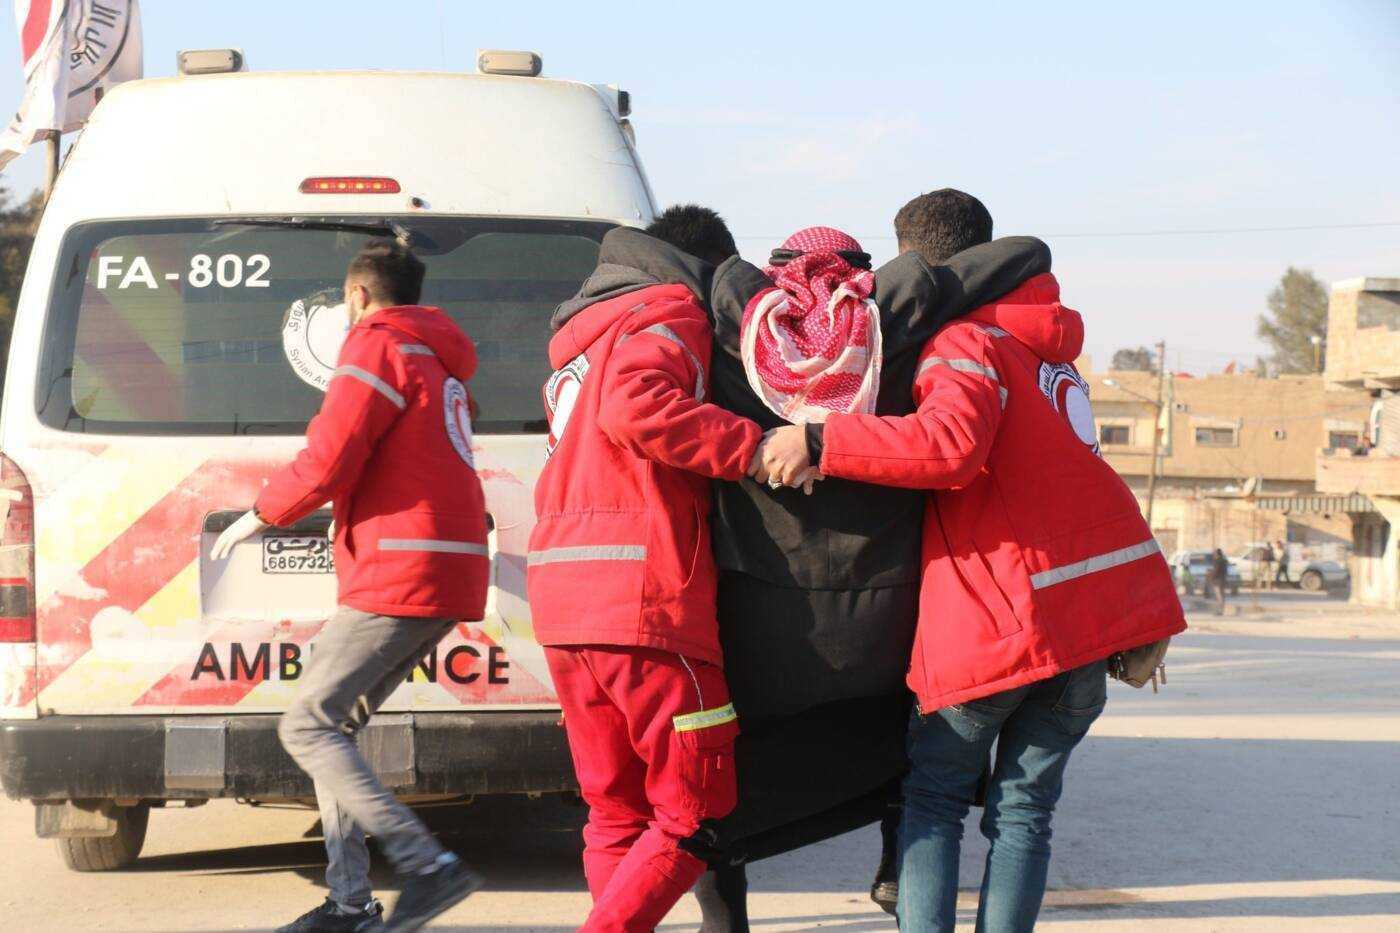 volunteers from the Syrian Ara Red Crescent carry man in front of an ambulance